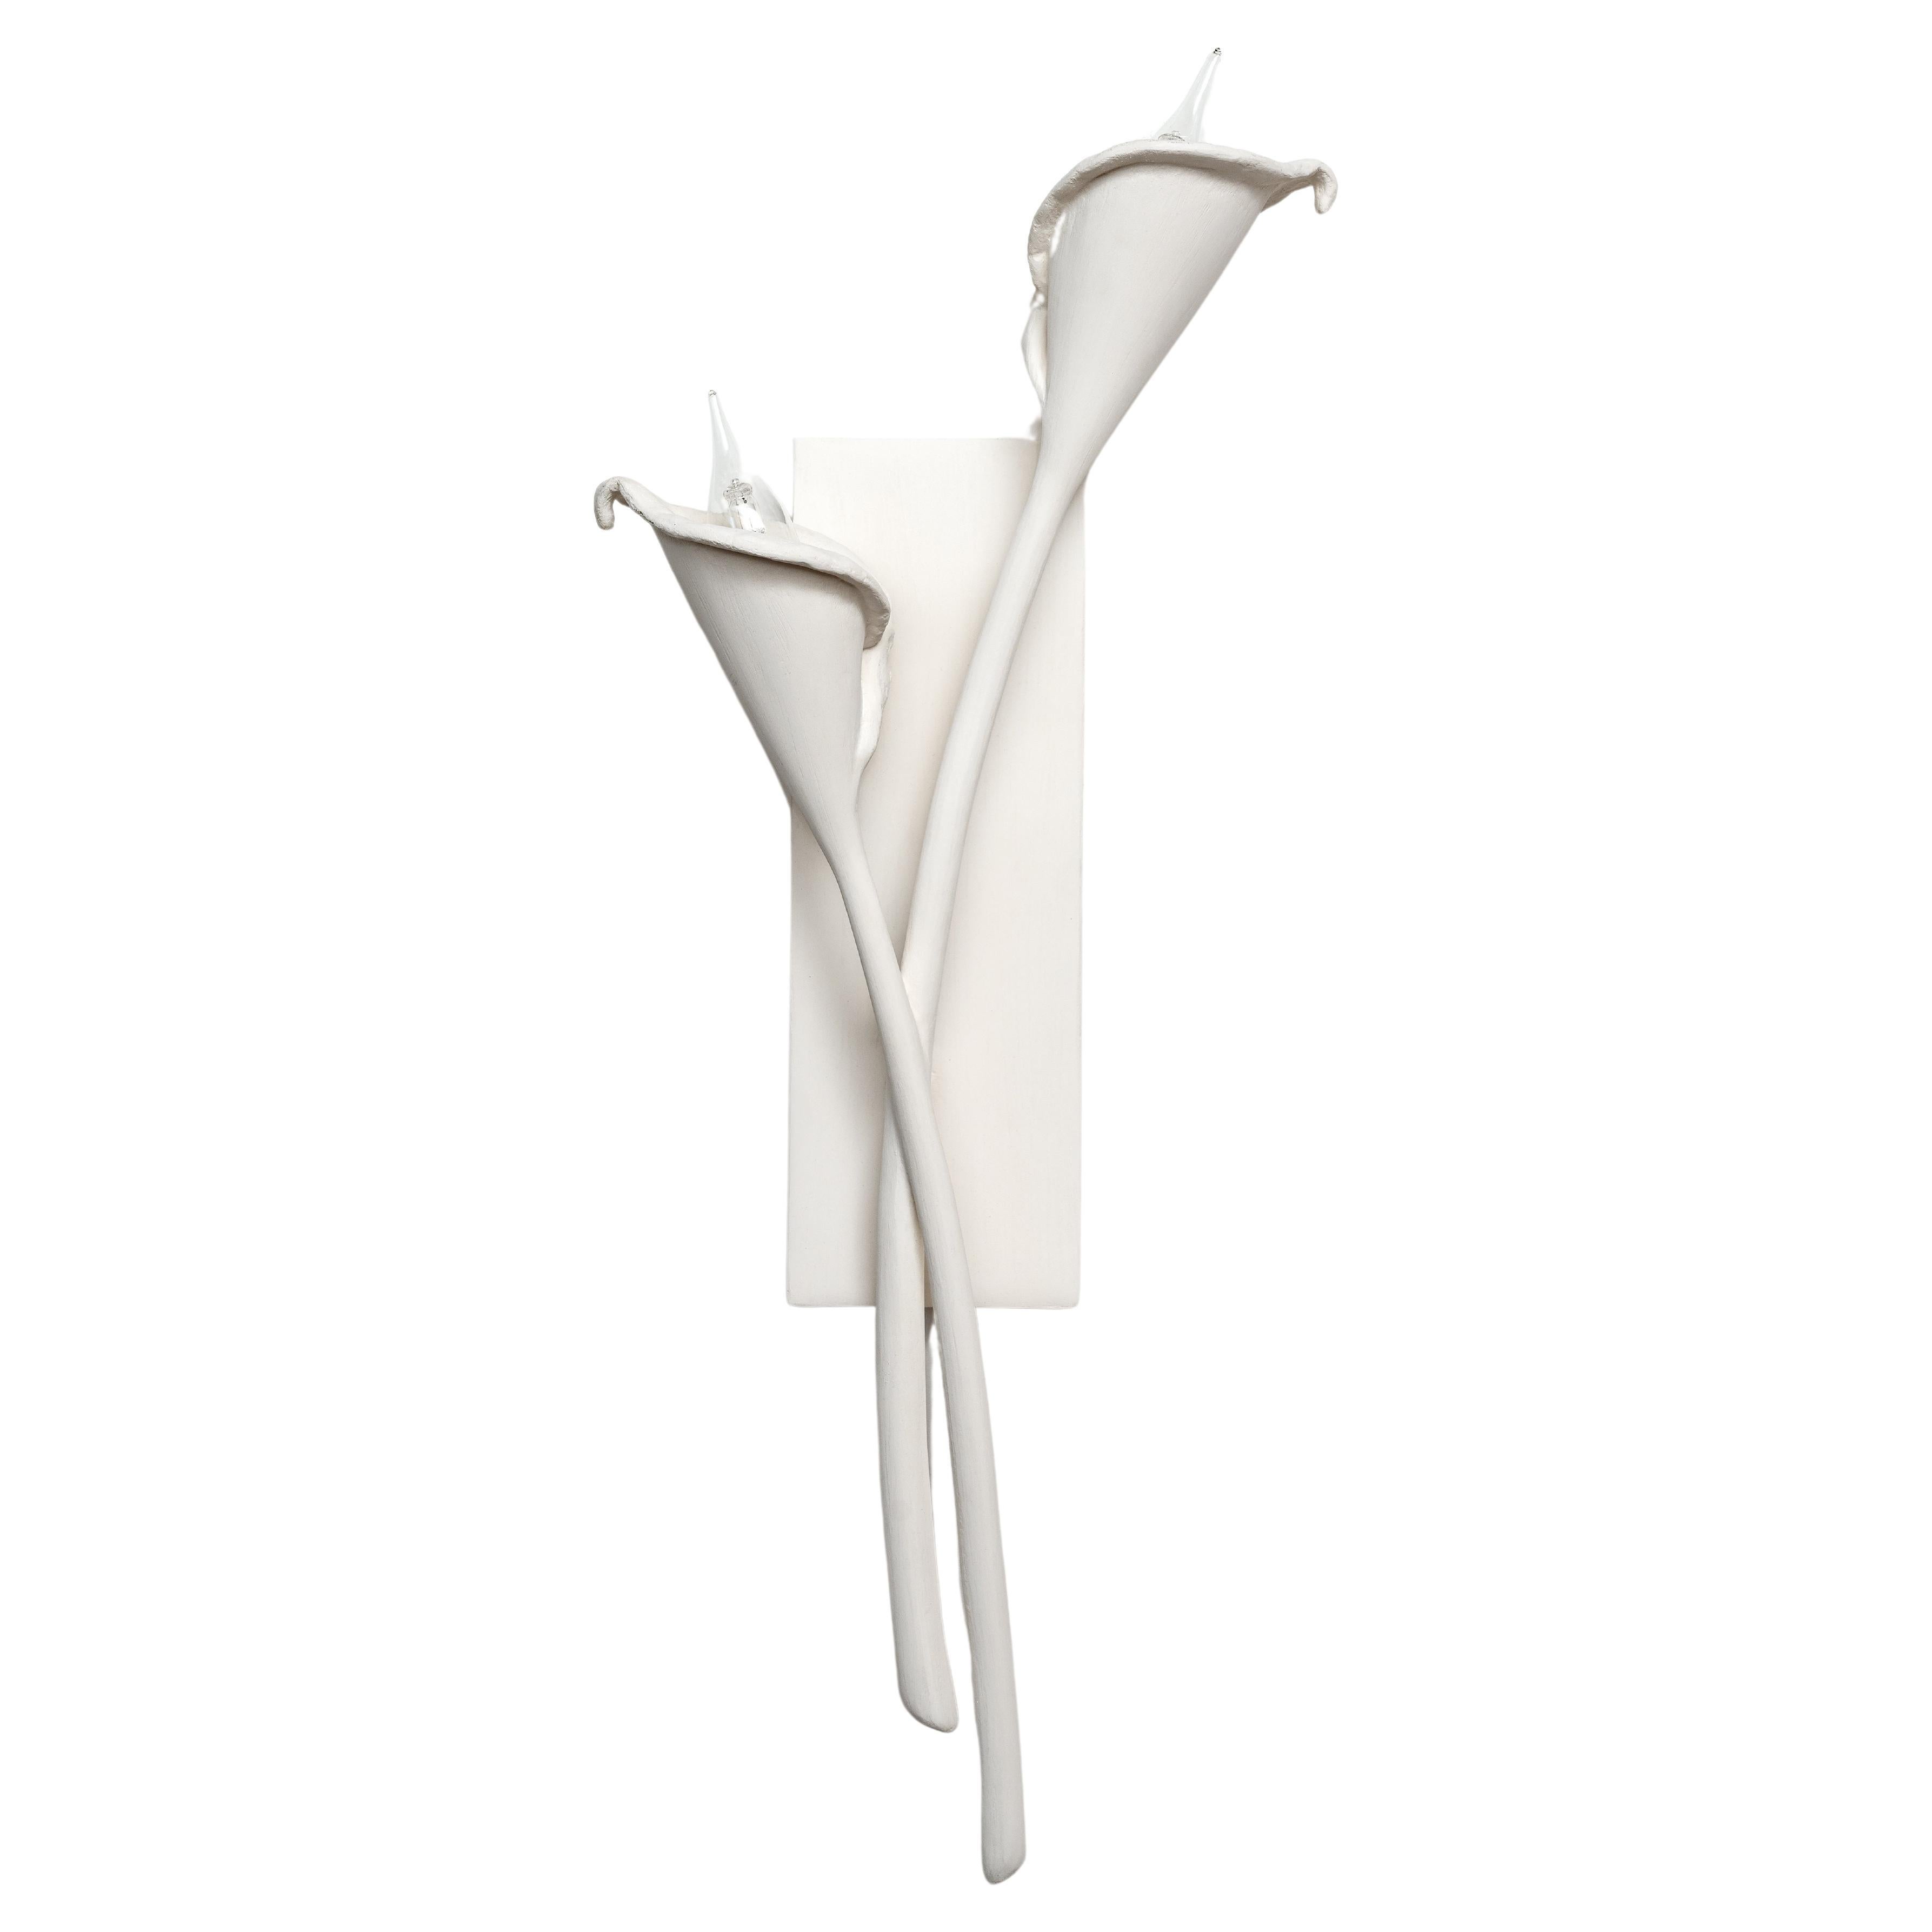 Calla Lily Contemporary Wall Sconce, Wall Light in White Plaster, Pair, Benediko